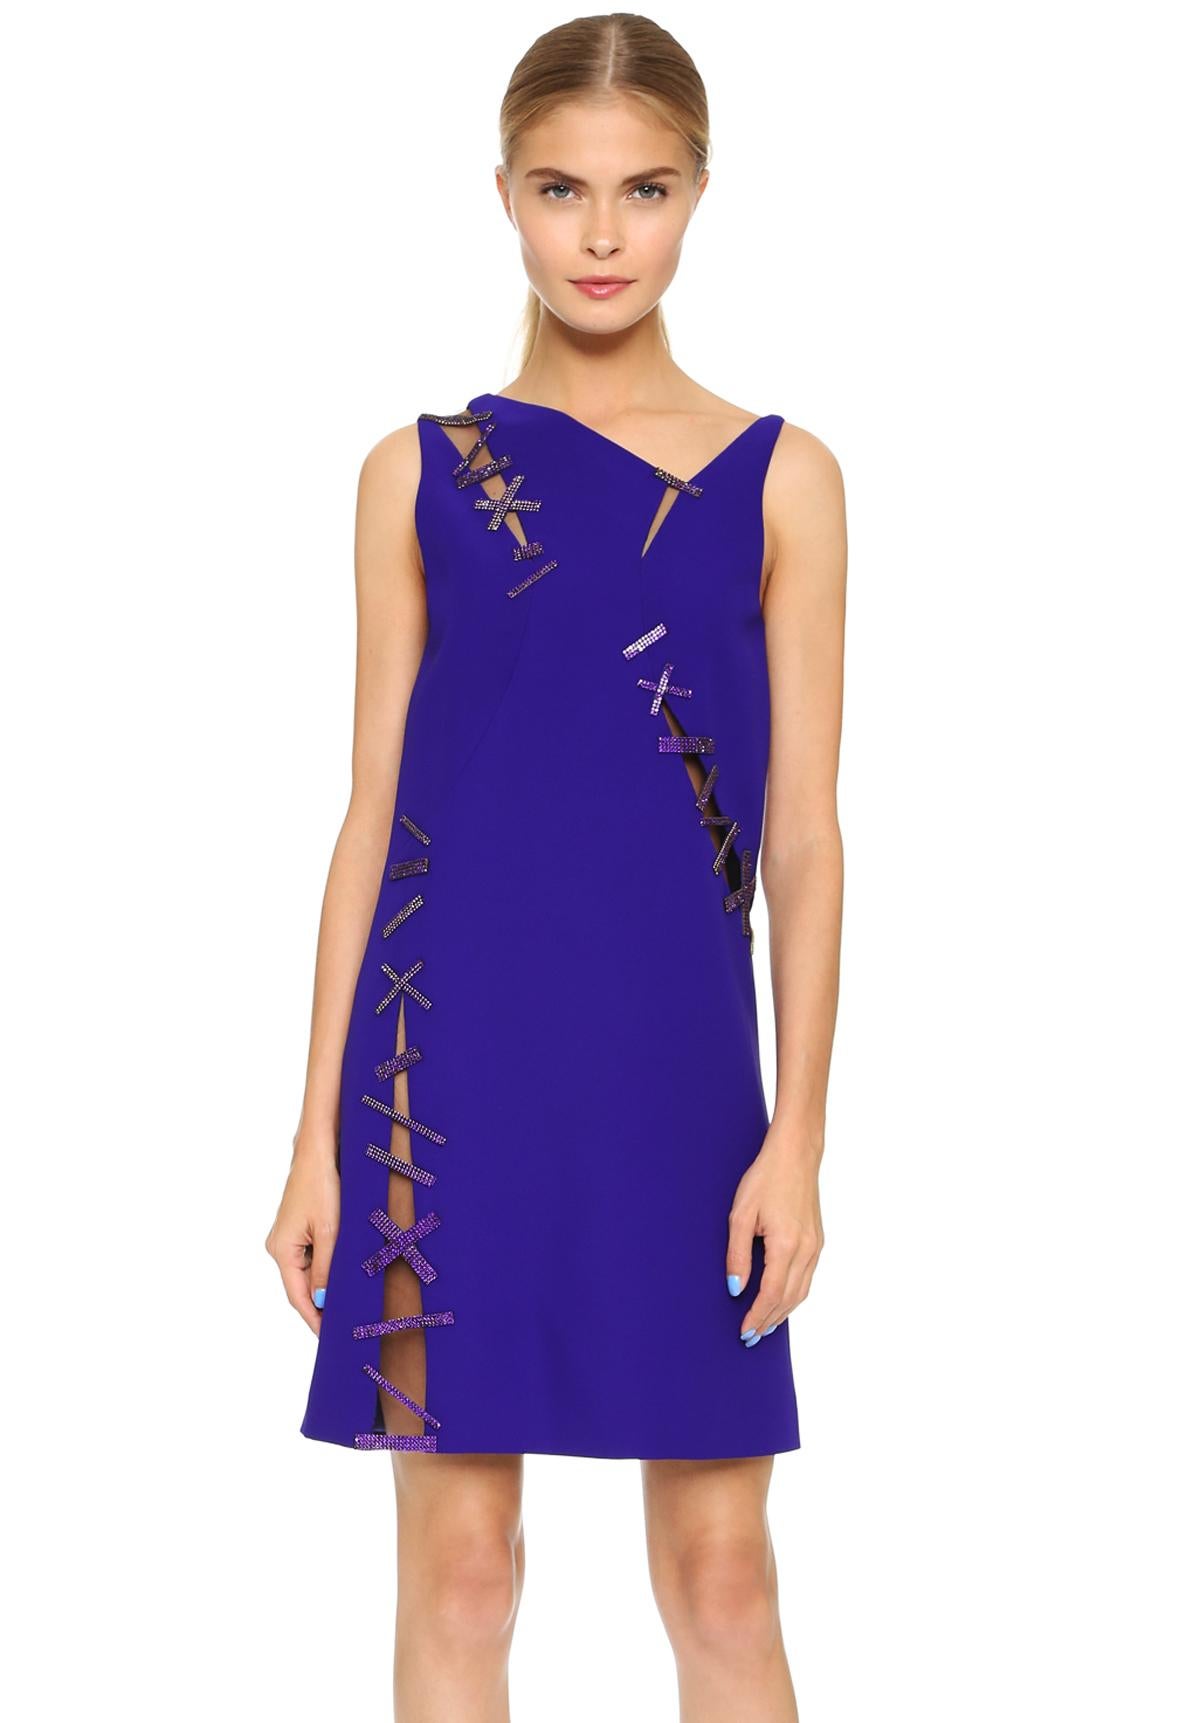 A Glamorous VERSACE Mini Cocktail  Dress
Italian size 38 - US 2
Purple Shimmering Swarovski Crystals Accent the Stitch Detailing at the Mesh-Trimmed Cut-Outs
The Sleek Shift Silhouette is Slashed to Reveal Slices of Skin
Asymmetrical Neckline,